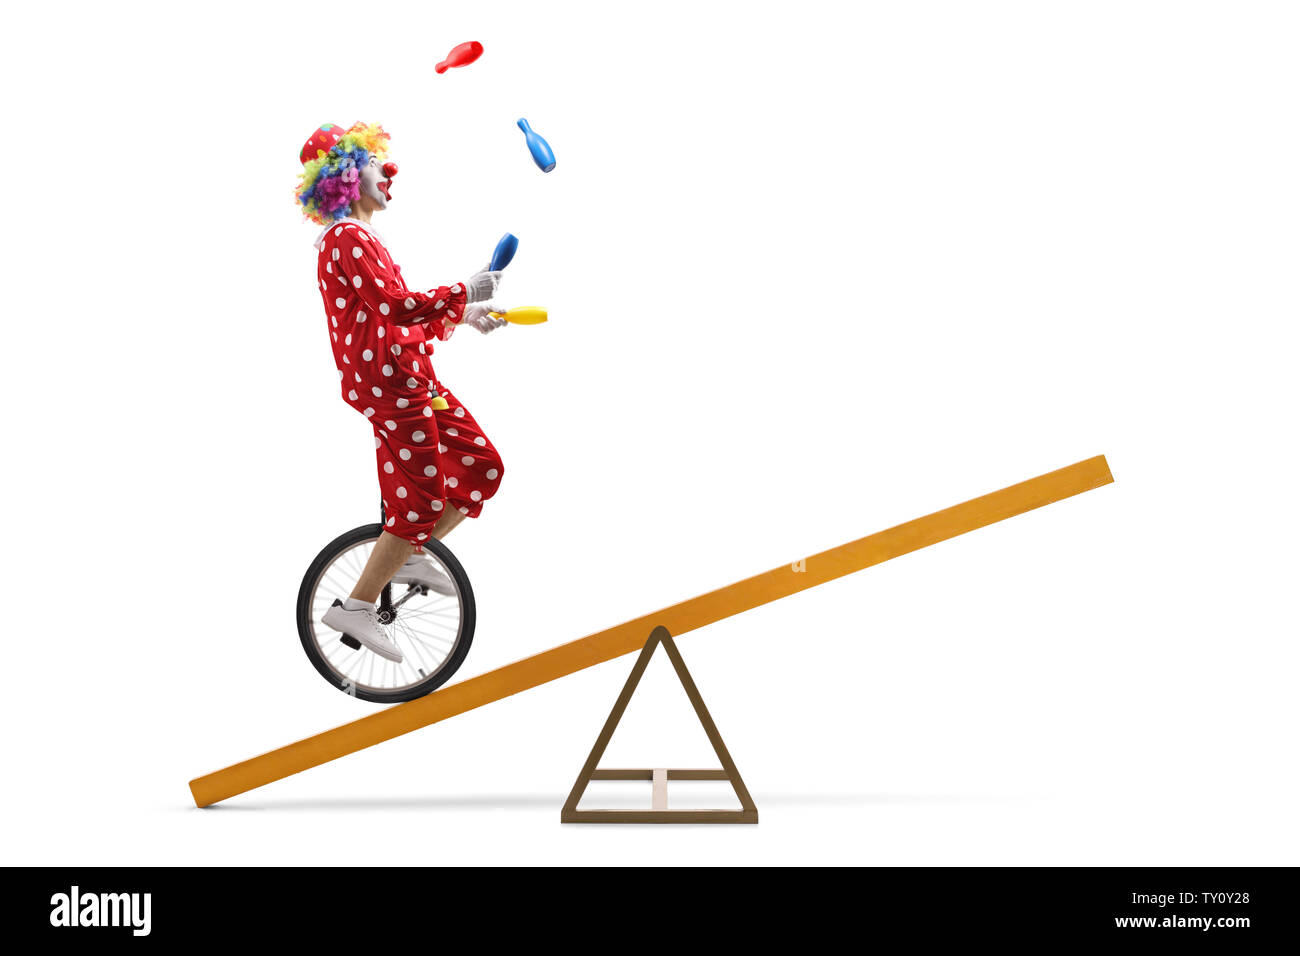 Full length shot of a clown riding a unicycle on a beam and juggling isolated on white background Stock Photo